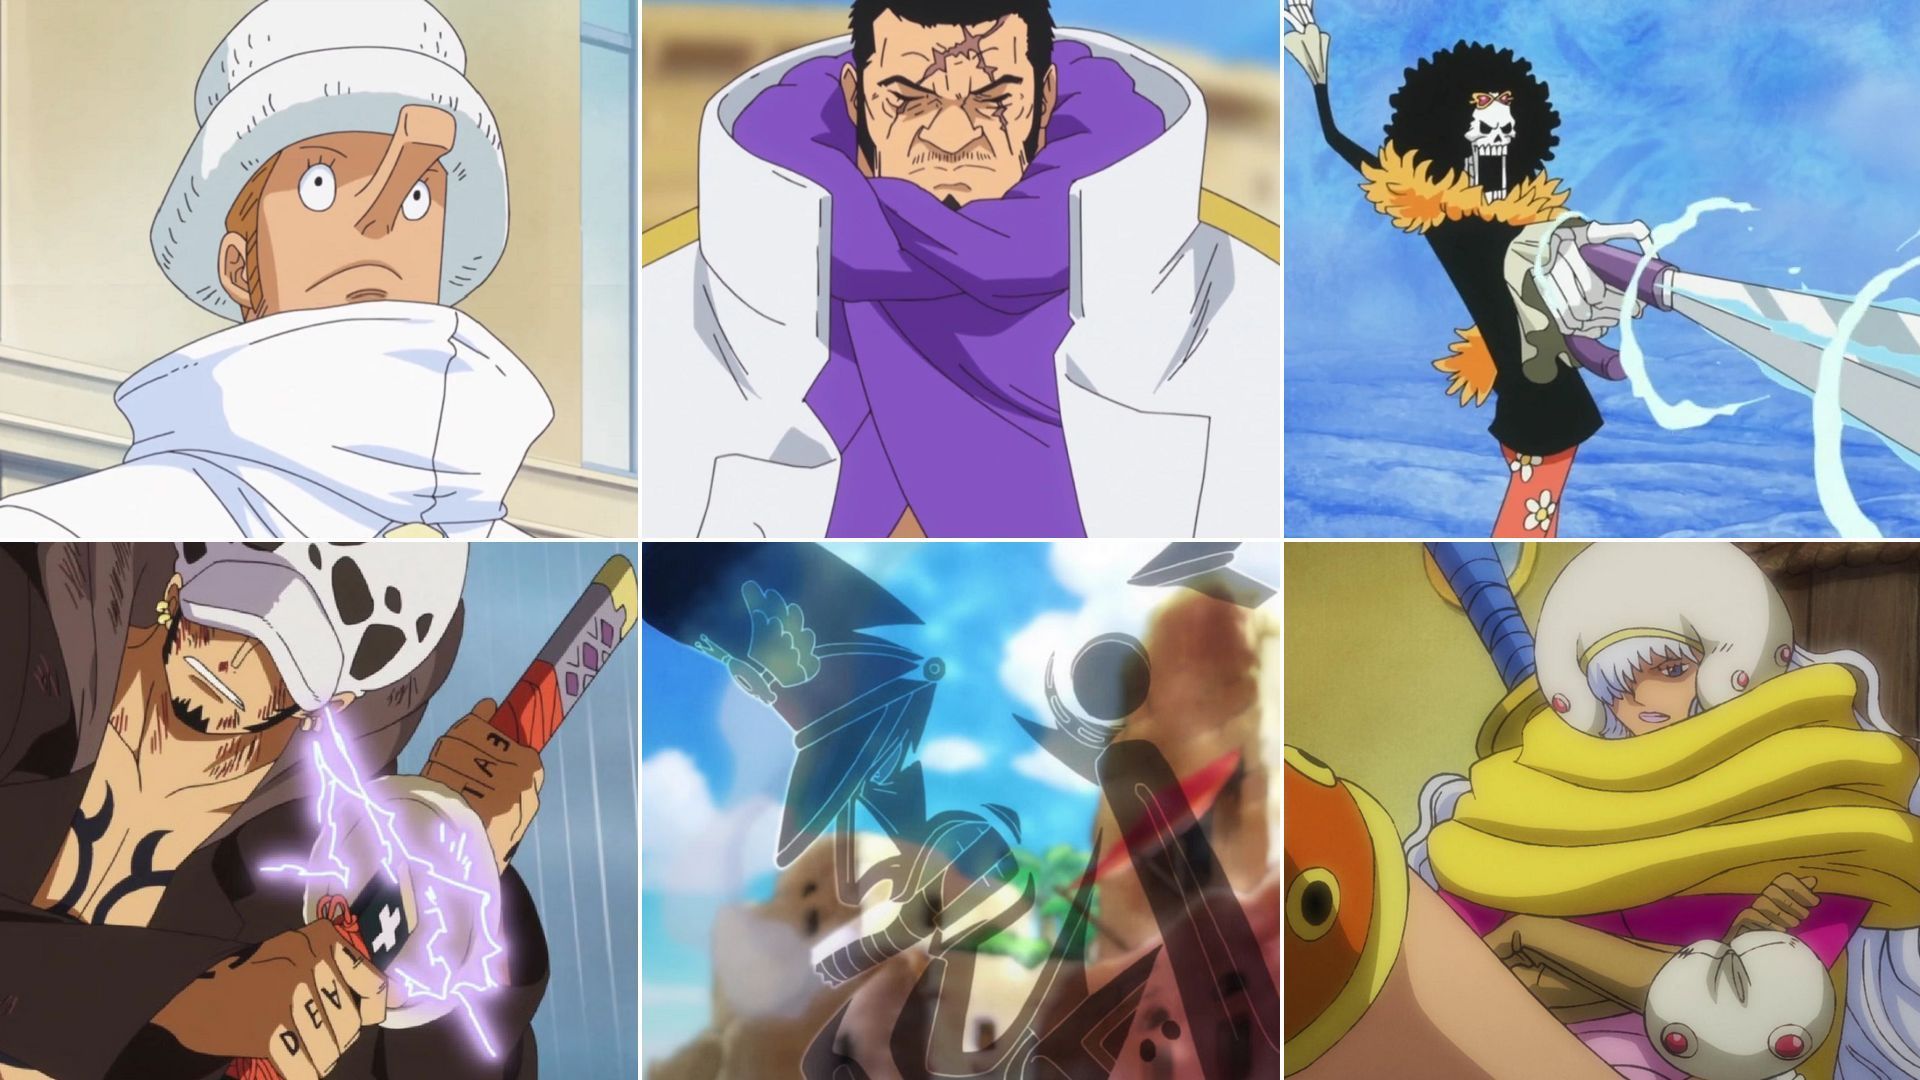 Swordsmen can use all sorts of abilities in One Piece (Image via Toei Animation)